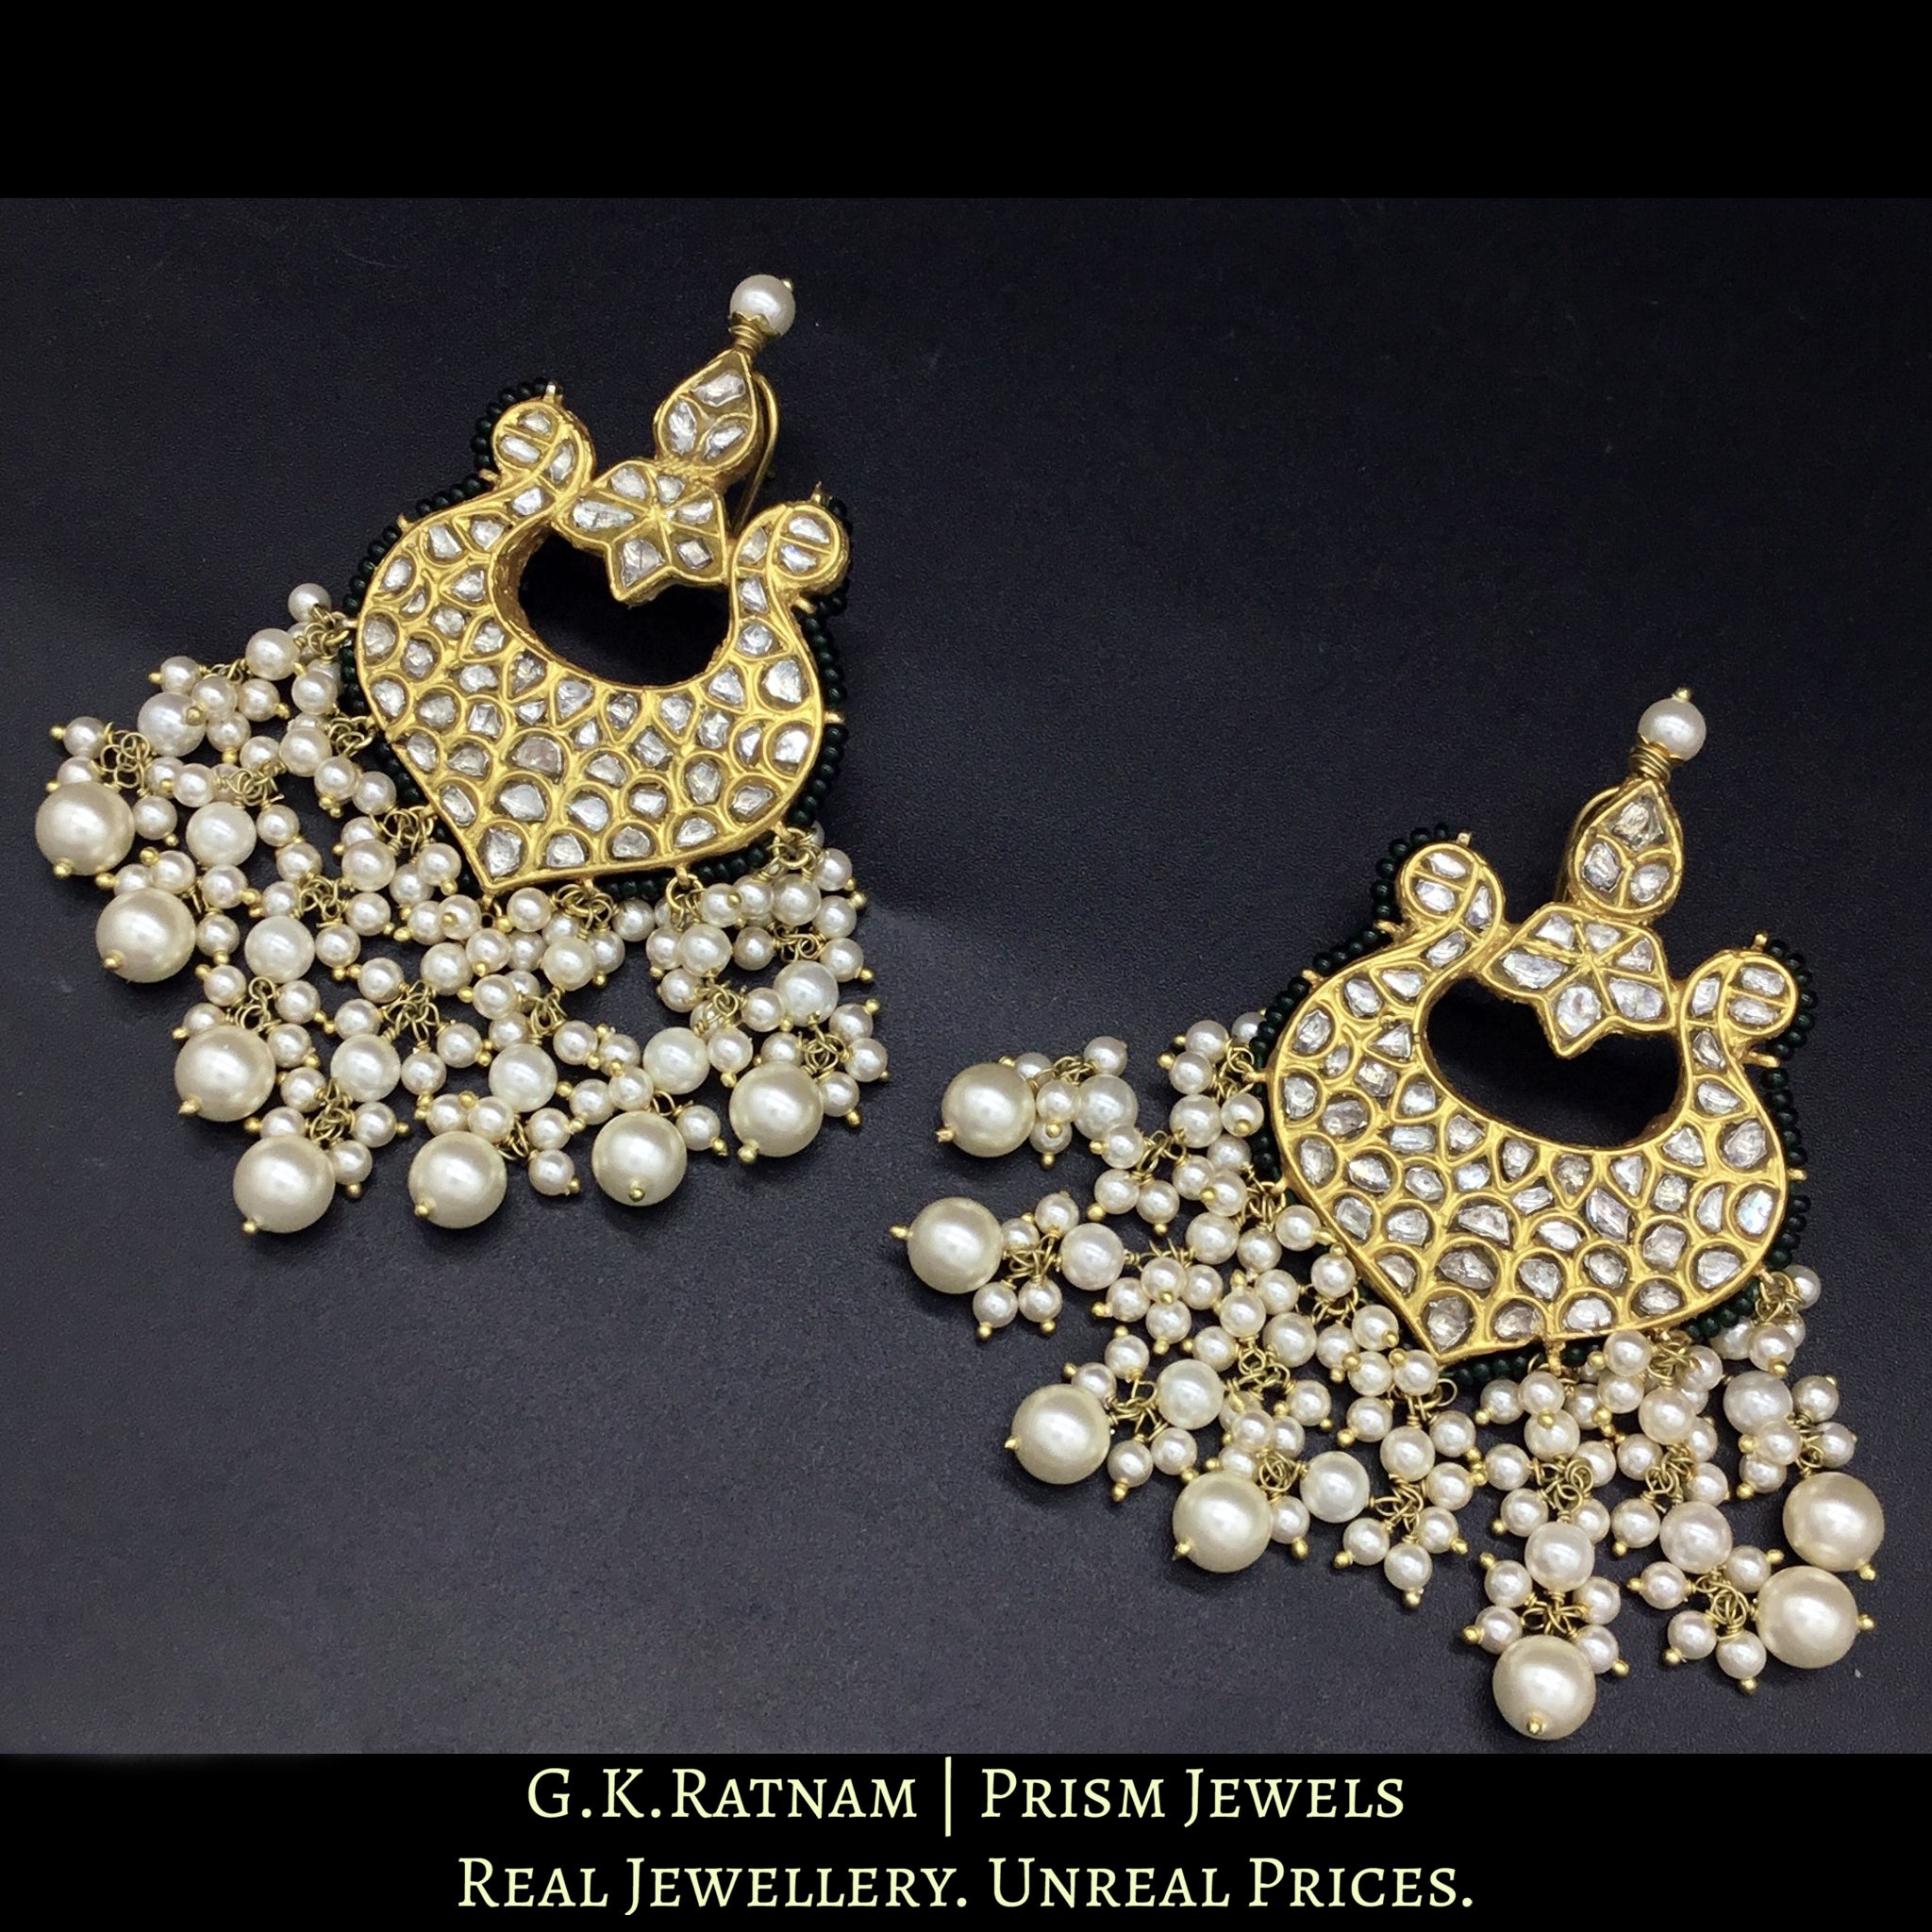 23k Gold and Diamond Polki Chand Bali Earring Pair with pearls strung in chandelier style